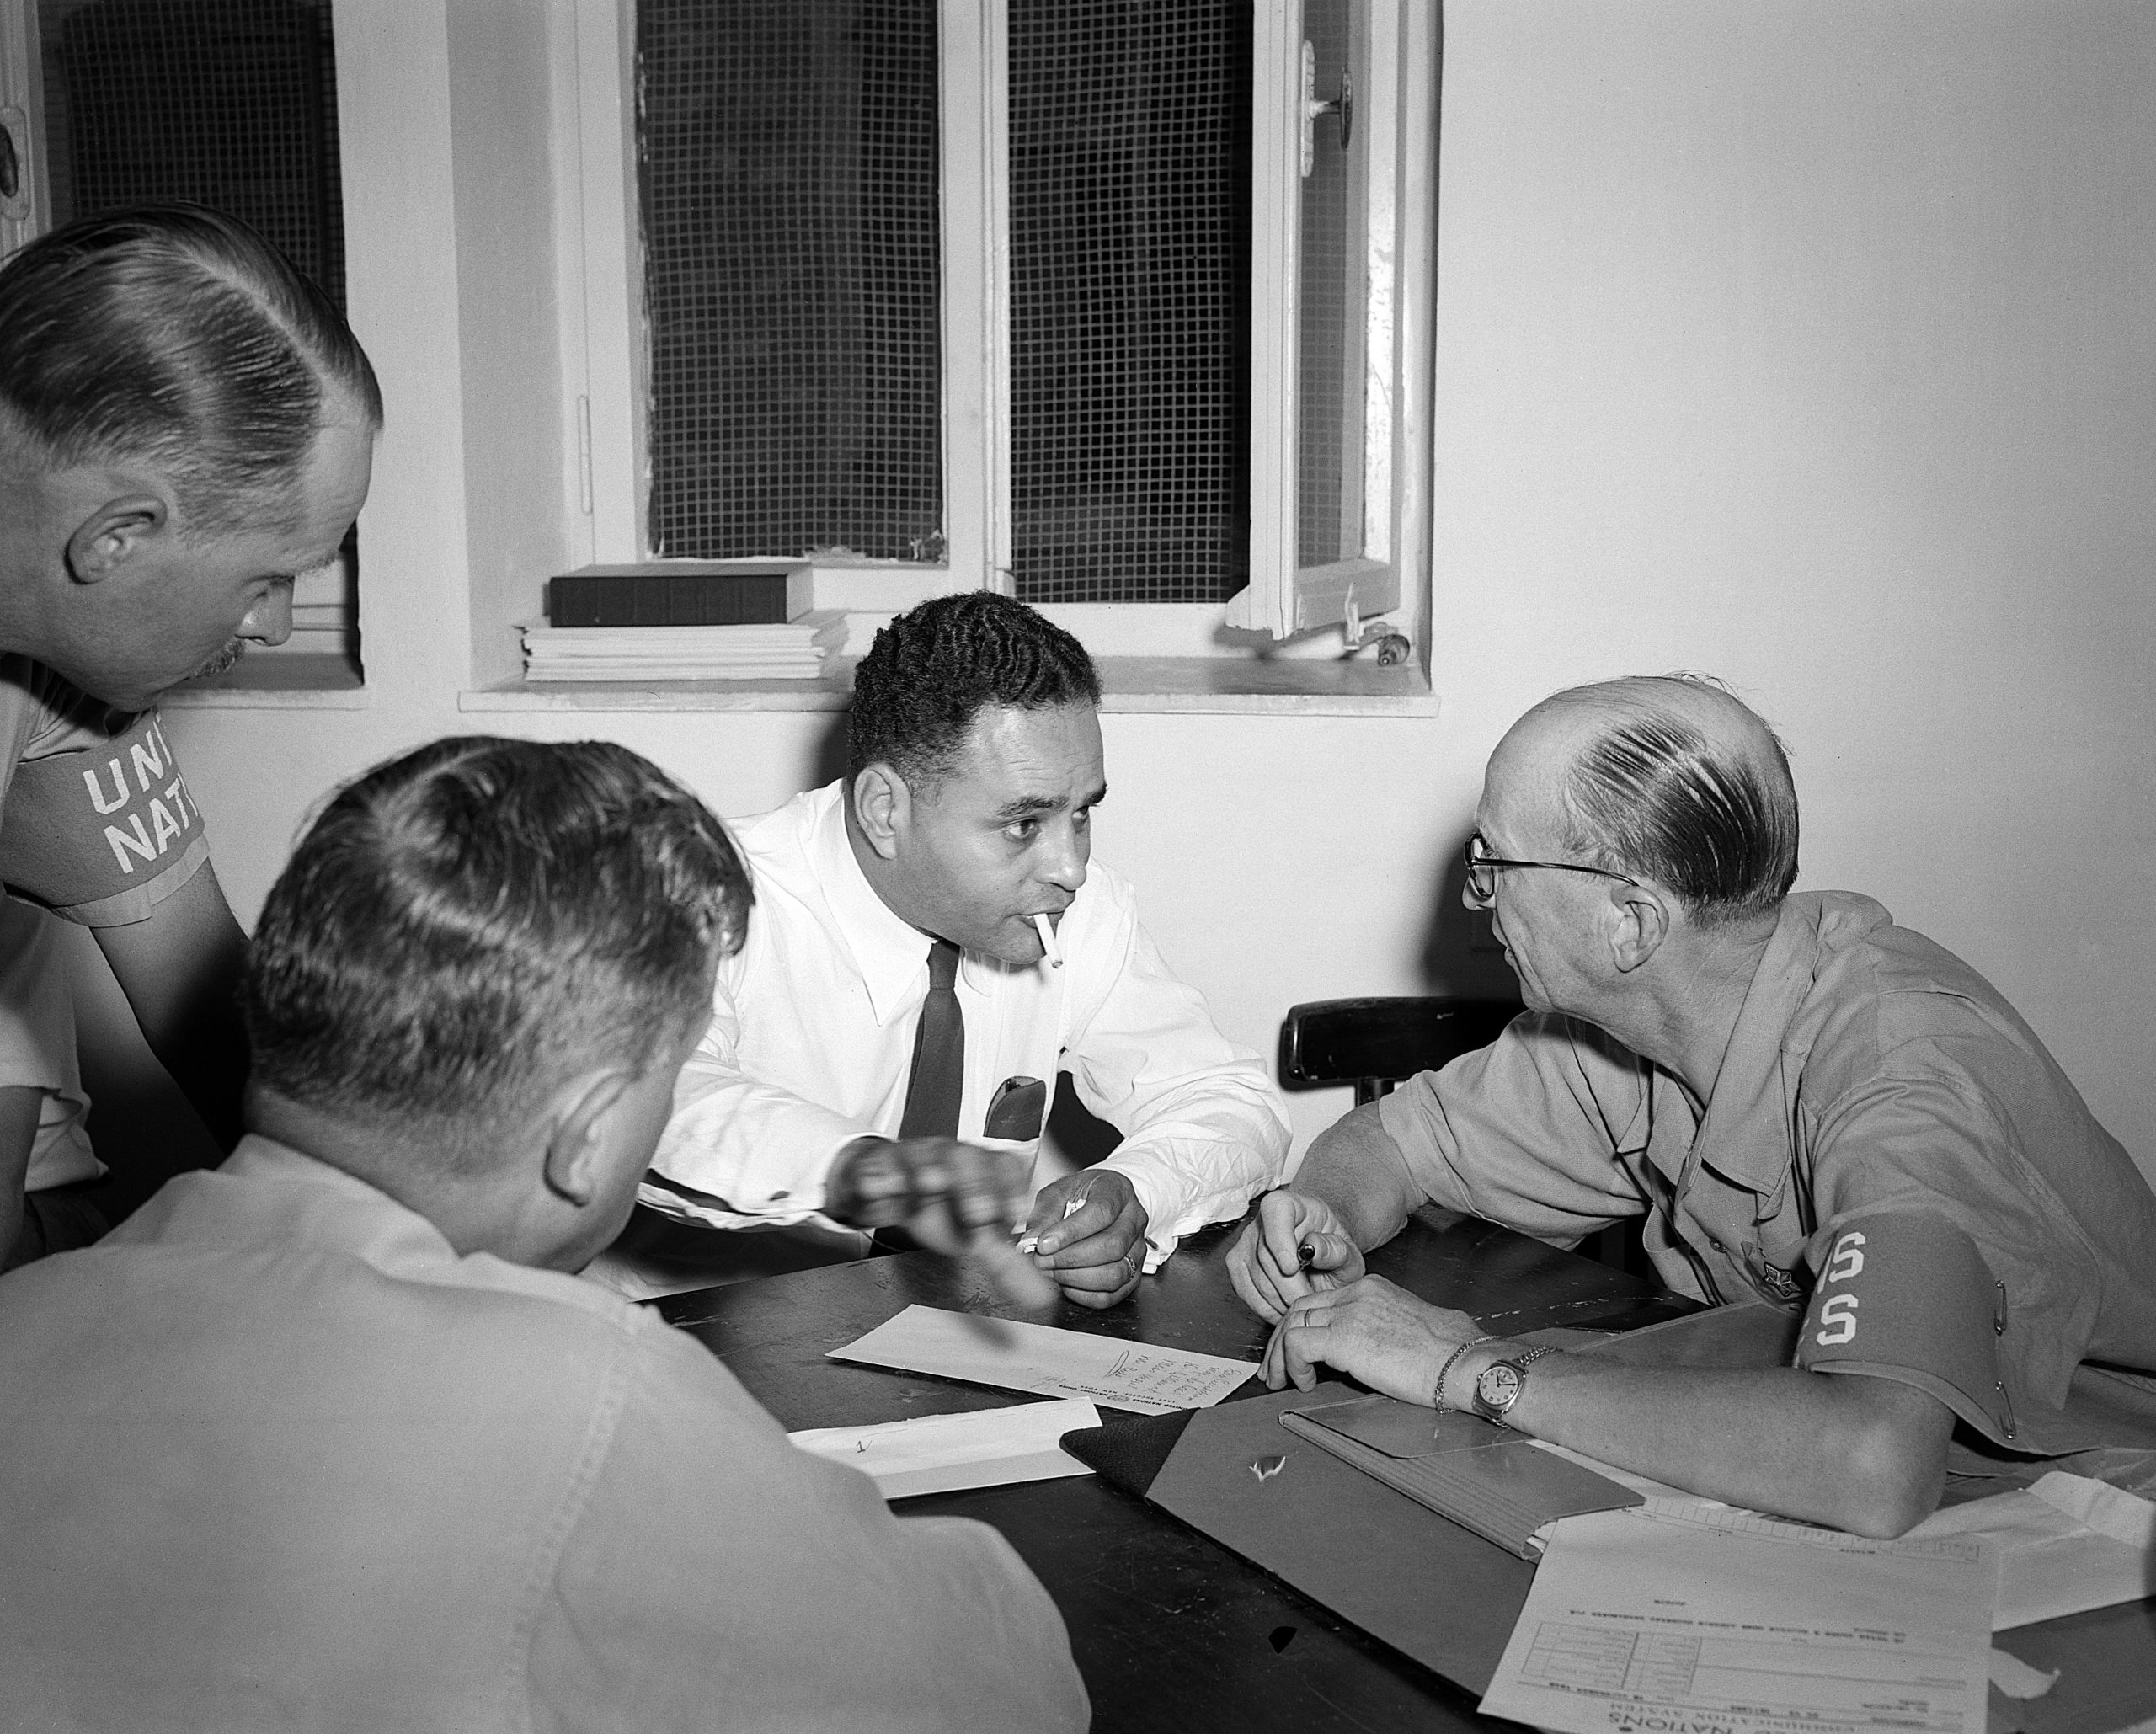 Ralph Bunche at a table negotiating in 1949.